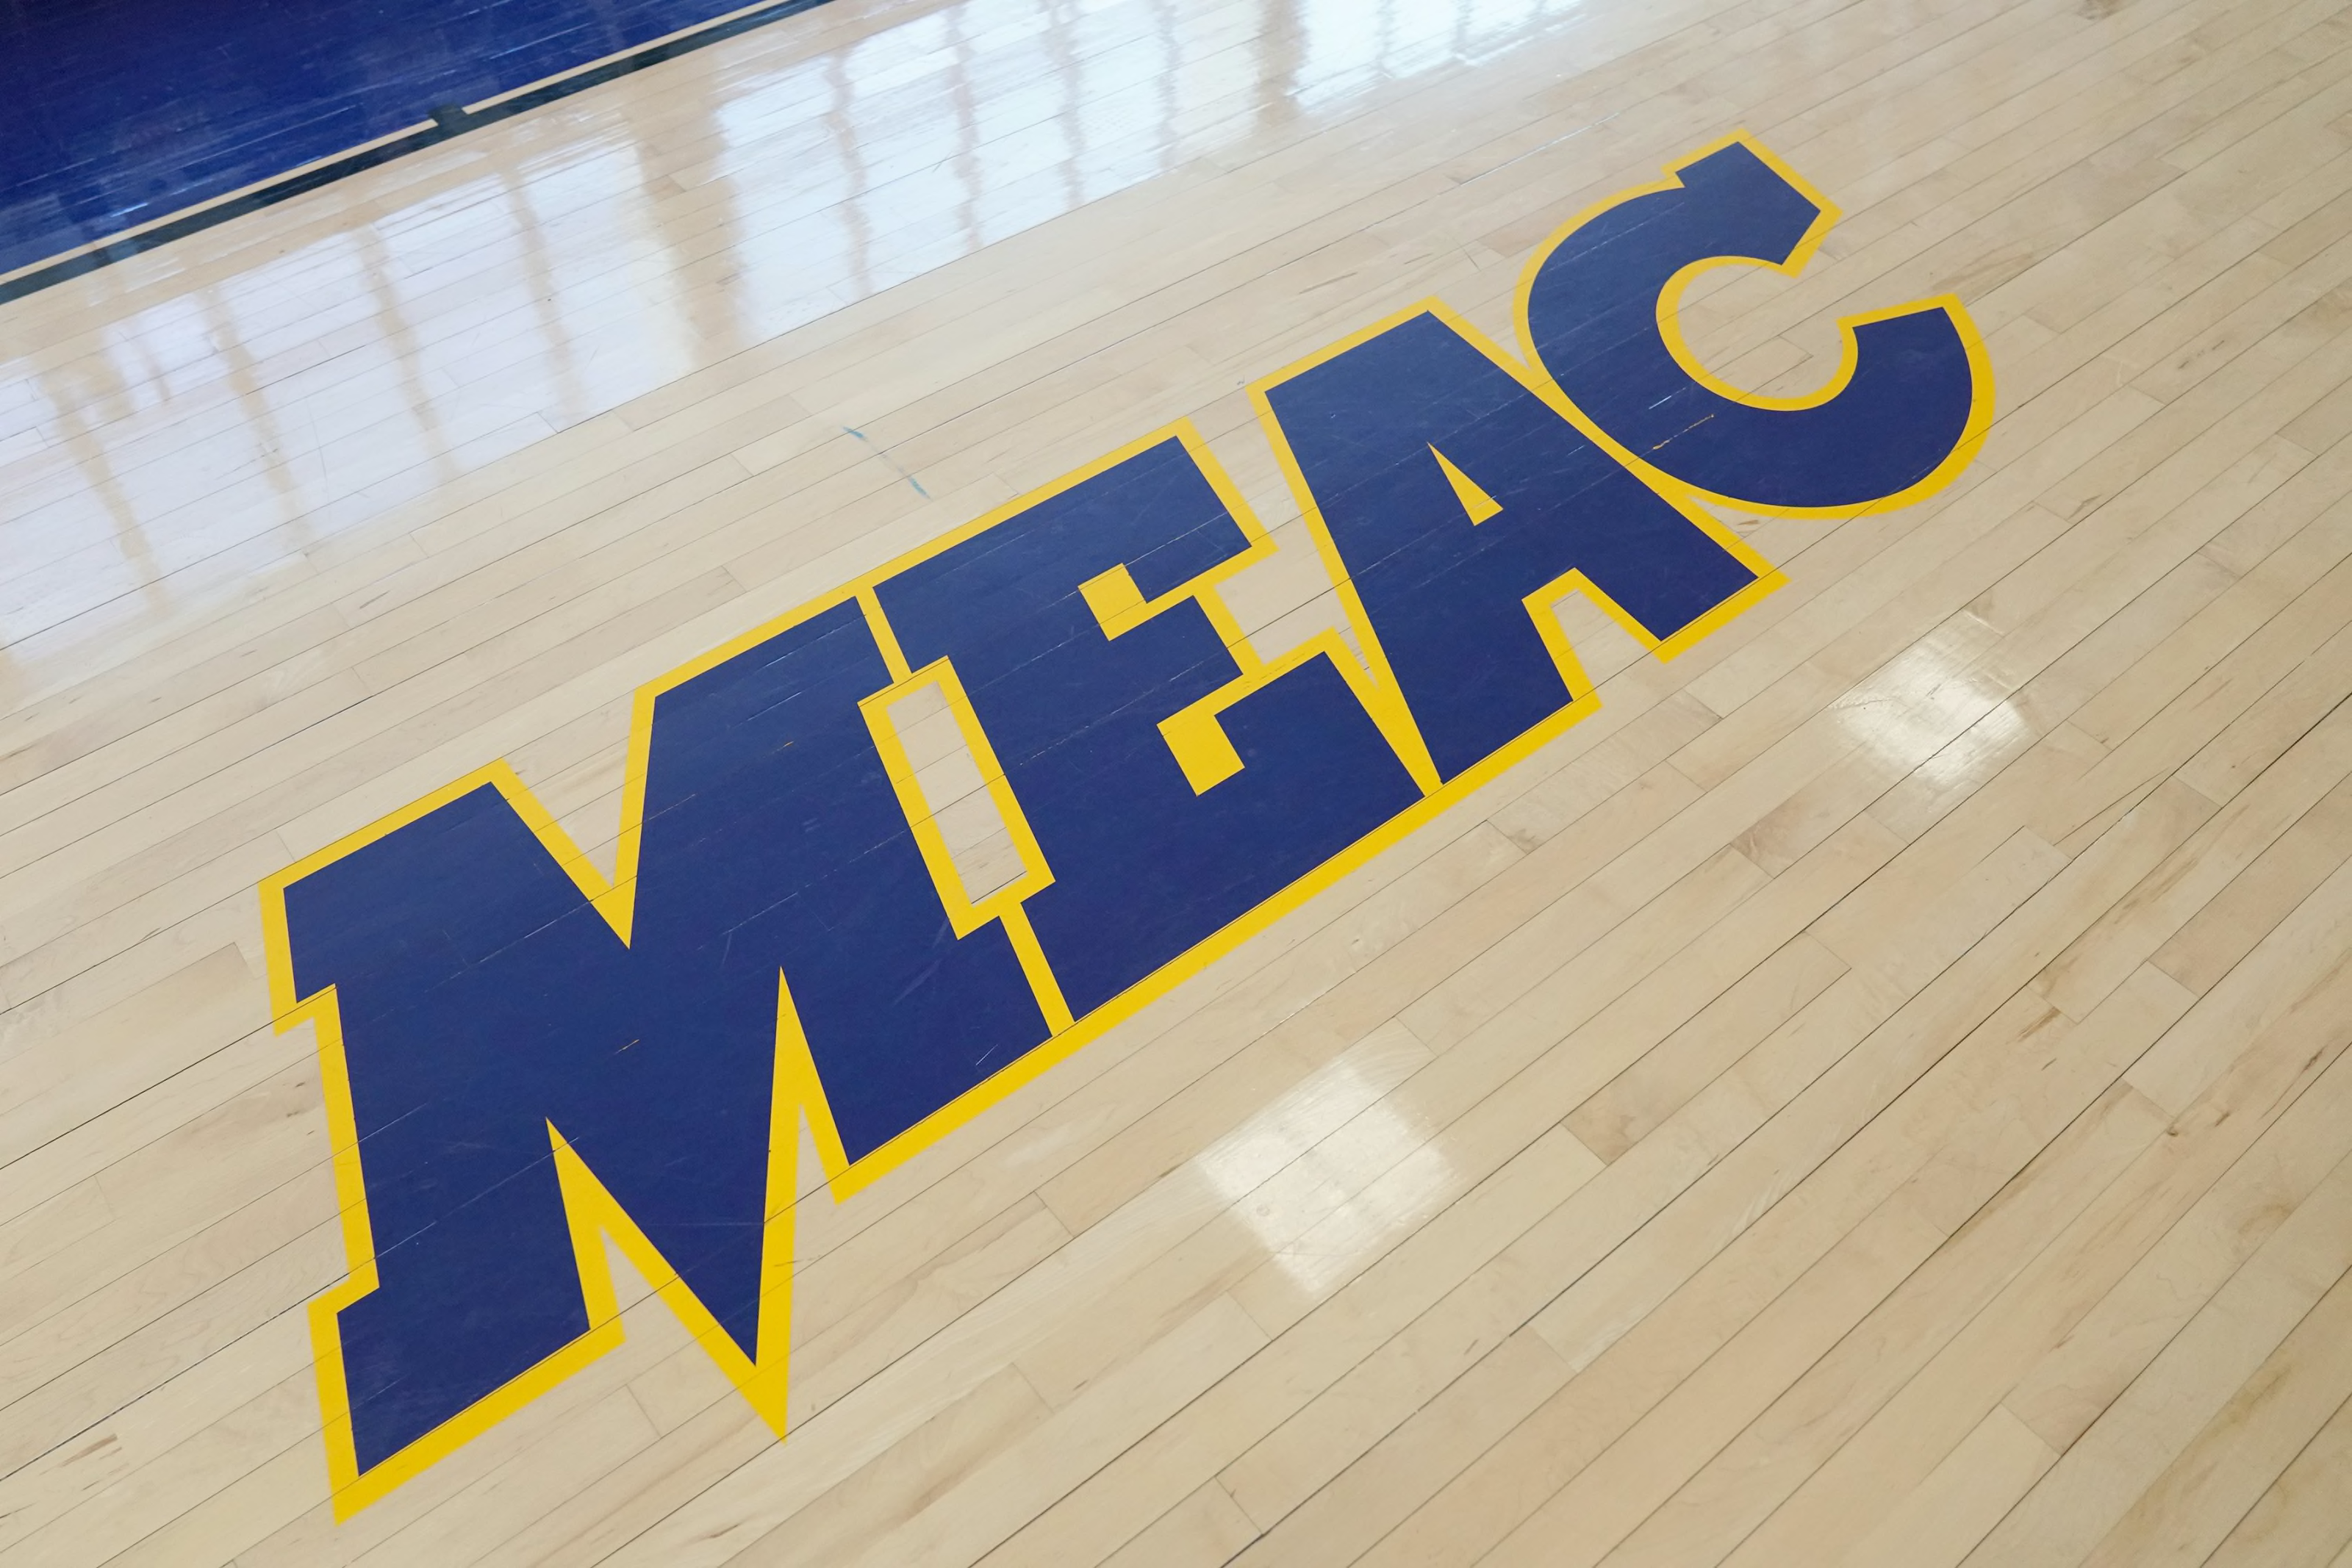 MEAC Basketball 3 candidates to replace departing North Carolina A&T